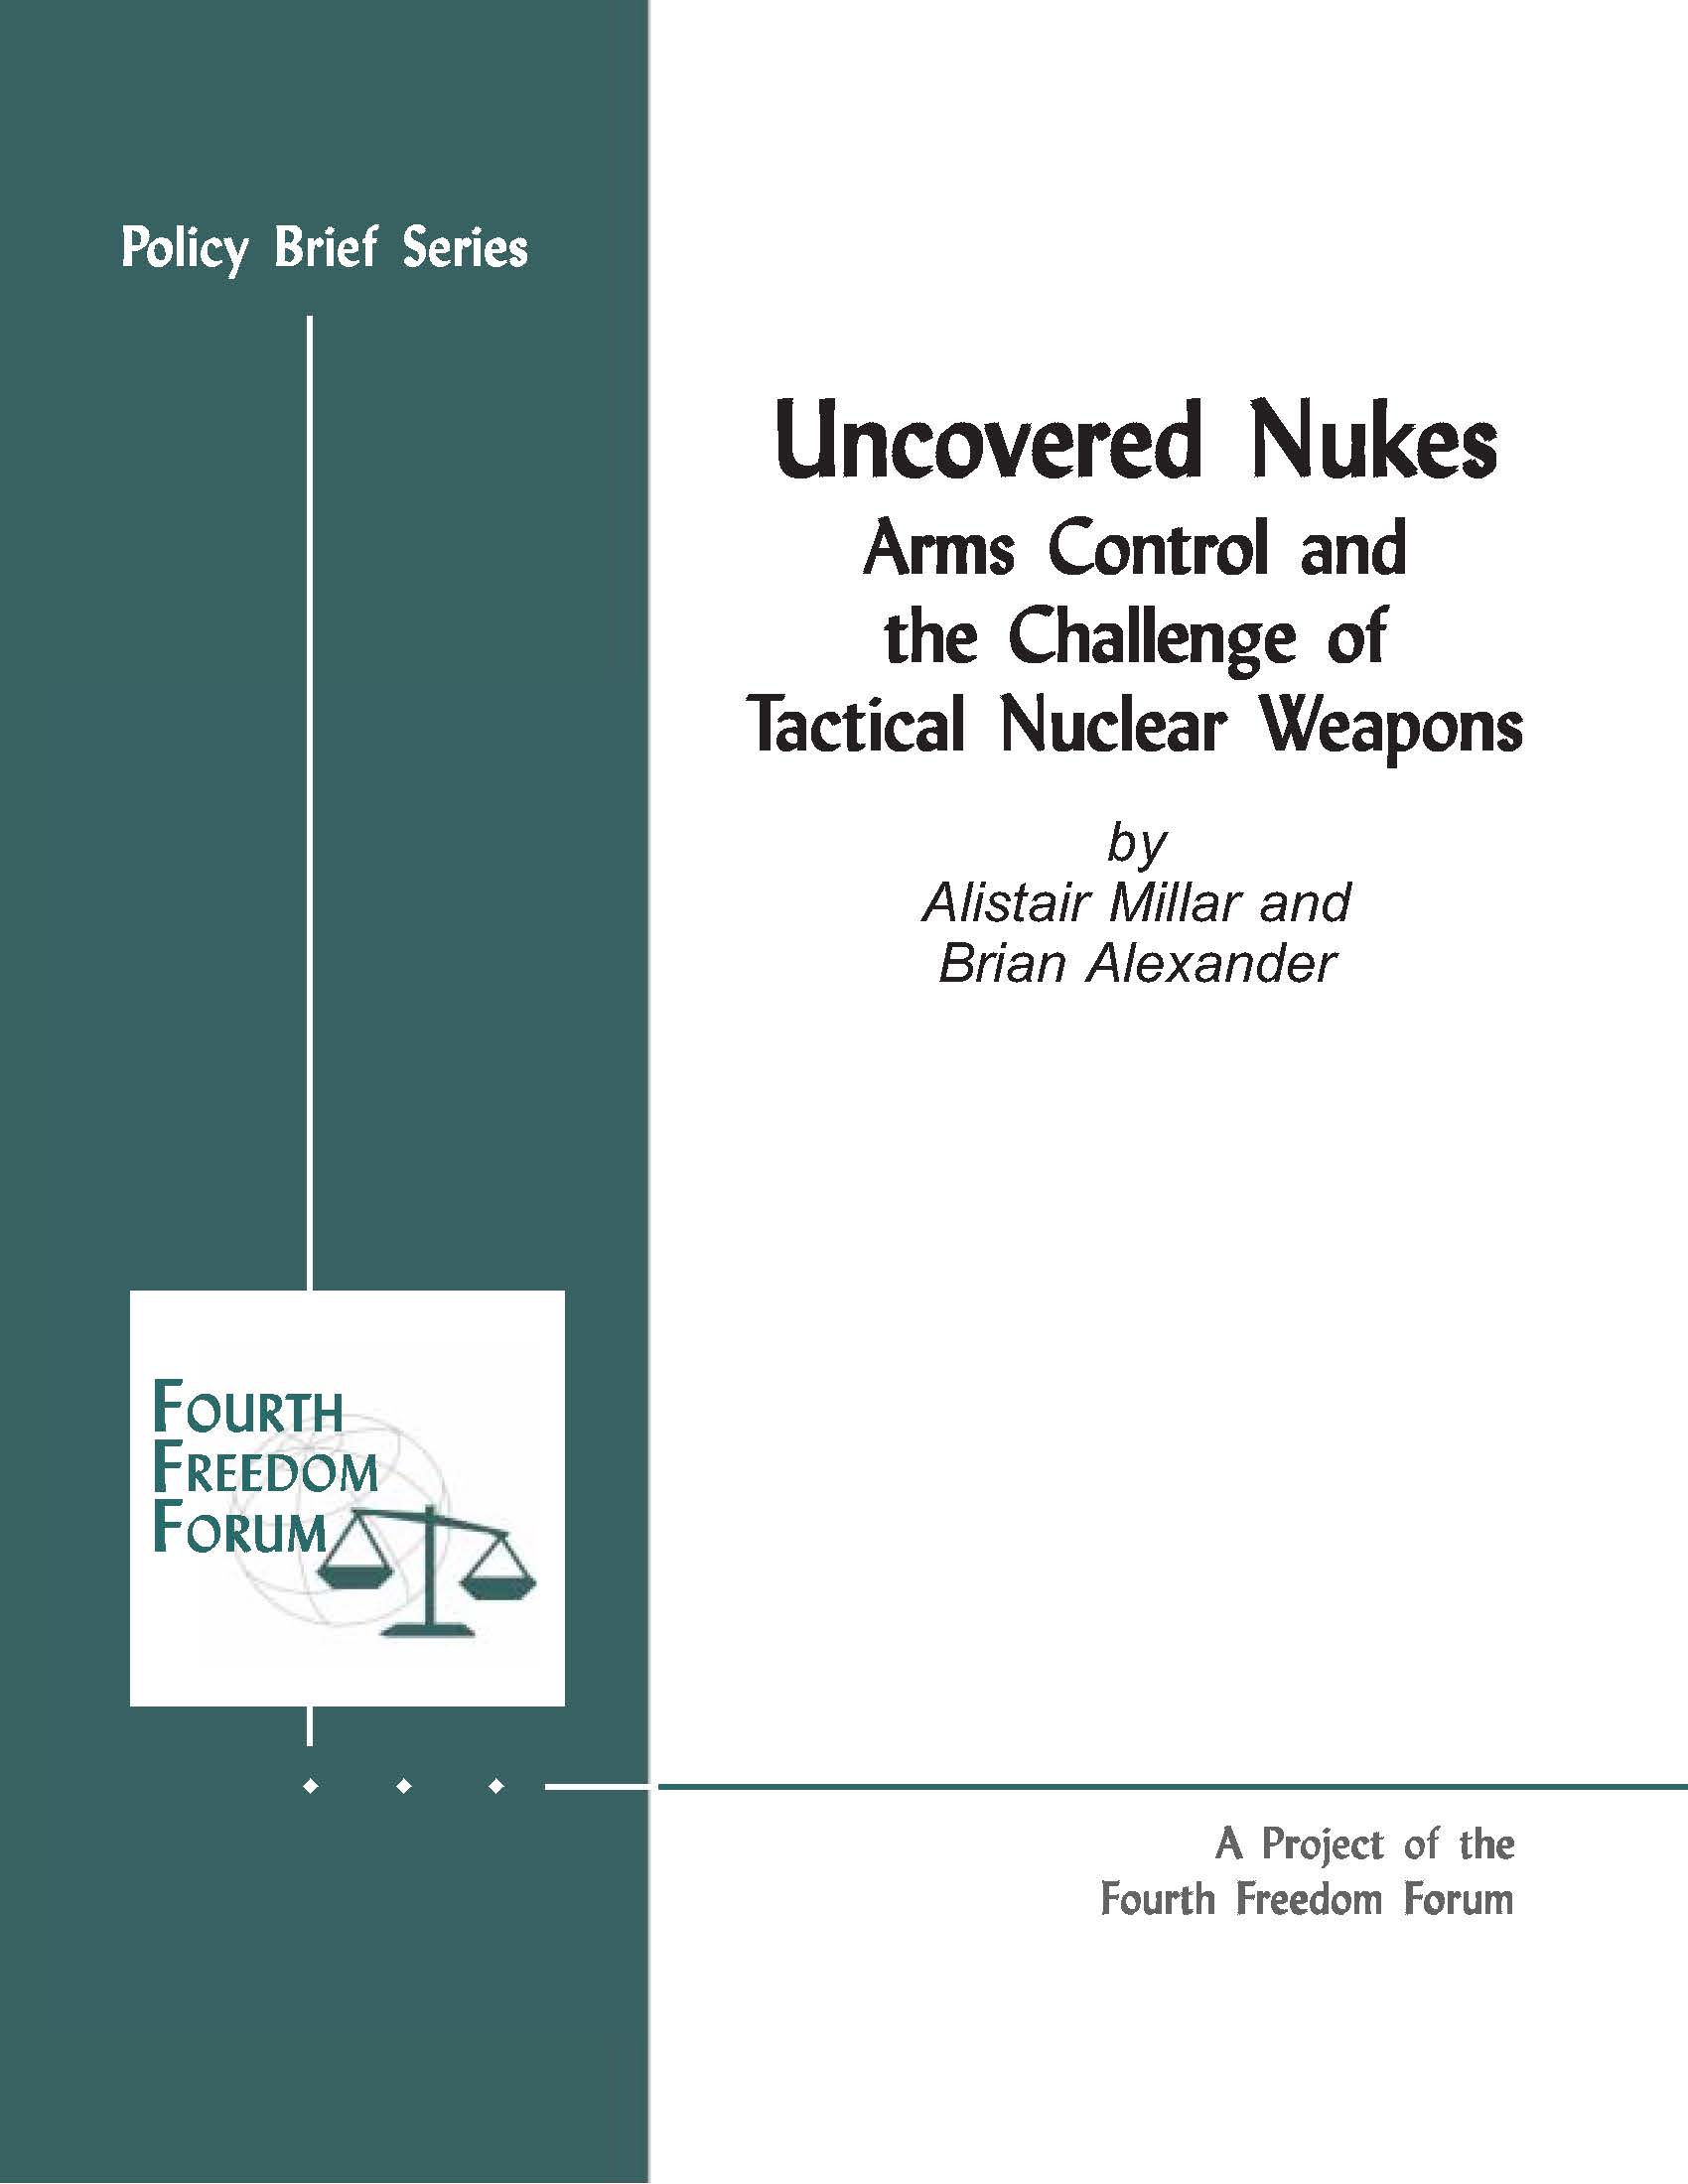 Uncovered Nukes: Arms Control and the Challenge of Tactical Nuclear Weapons